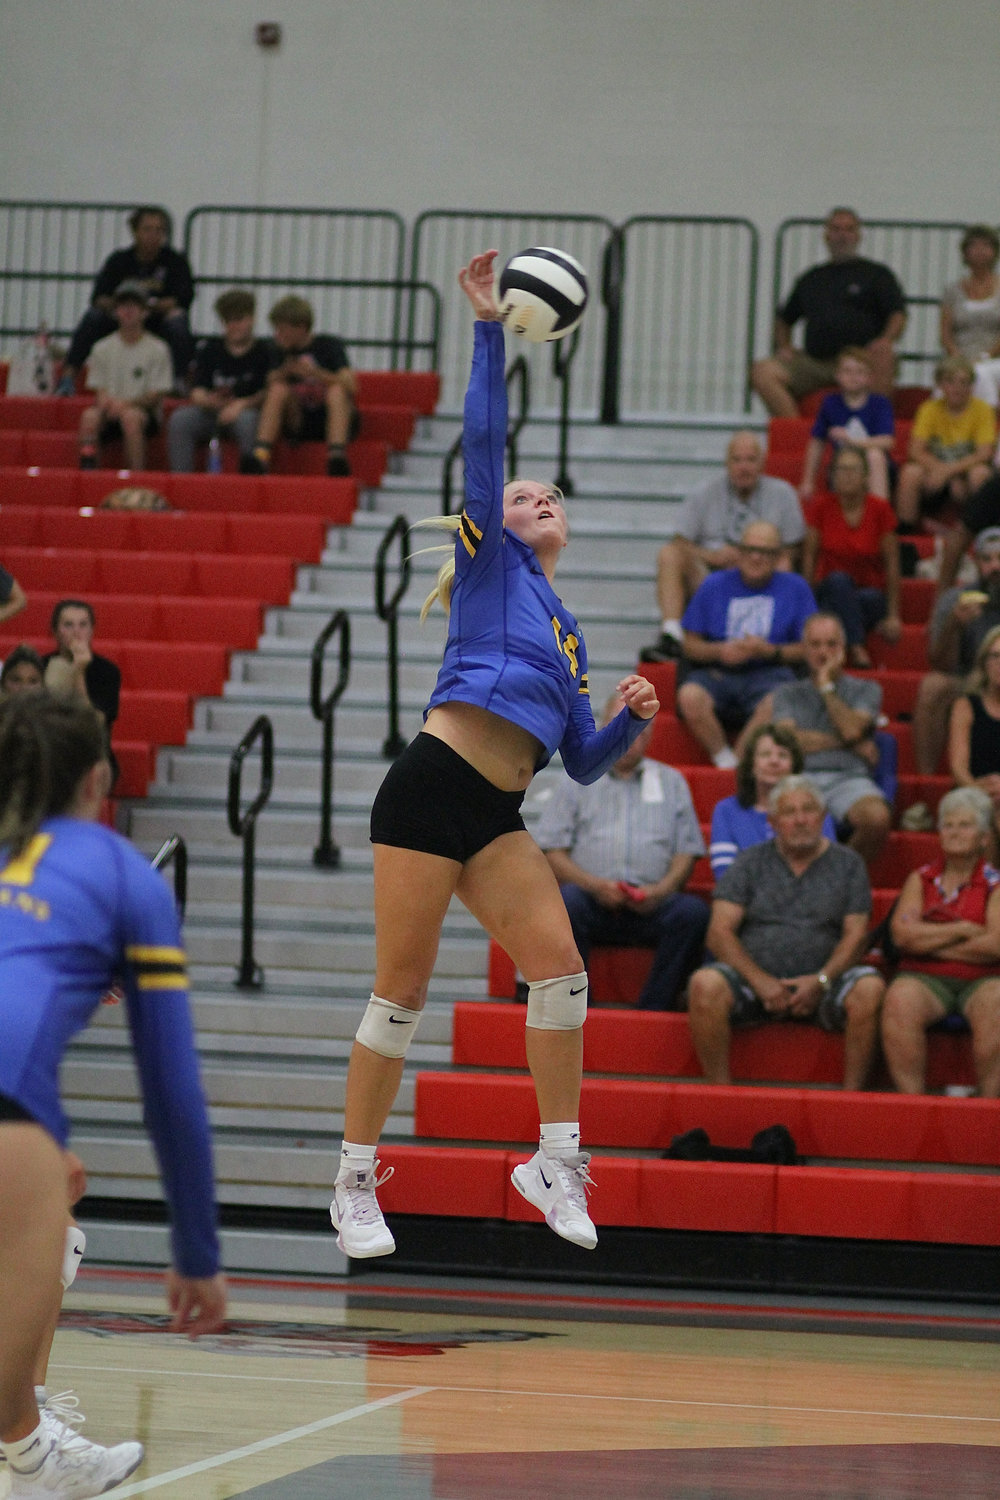 Macy Bruton tallied 27 kills against county rival Southmont to lead CHS to a county title. The senior continues to rank 1st in the state in total kills as she keeps inching closer to the 2,000 mark for her career.